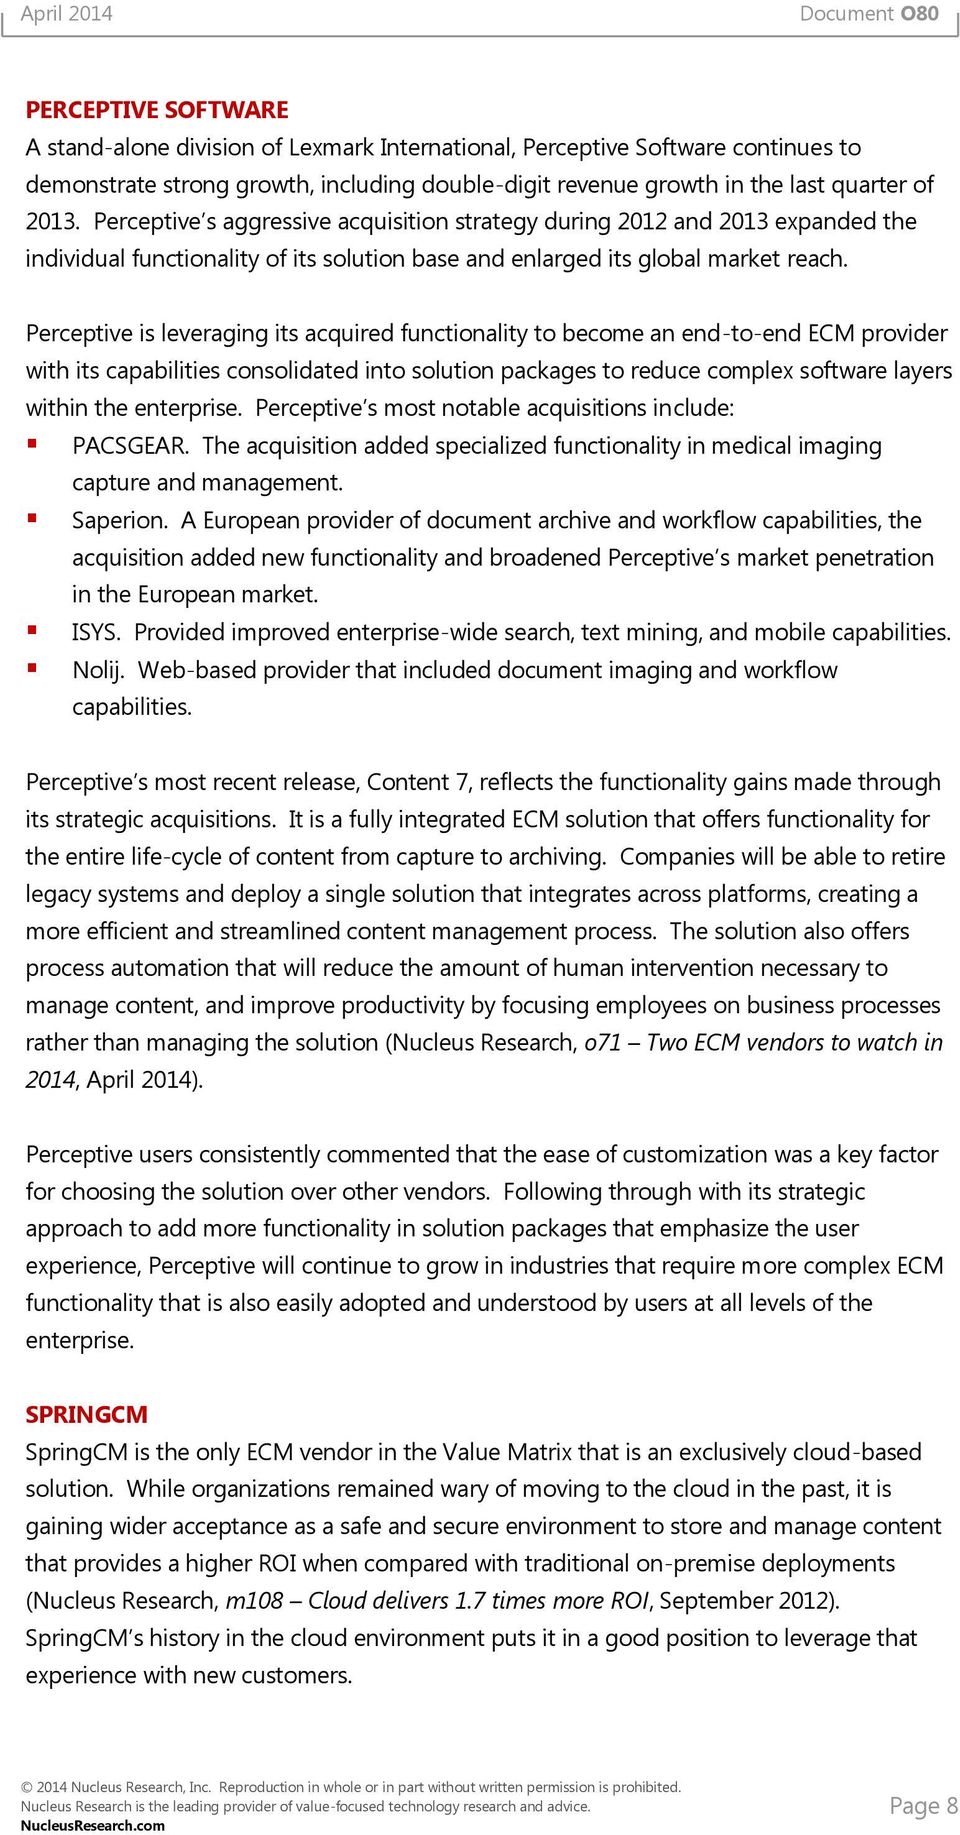 Perceptive is leveraging its acquired functionality to become an end-to-end ECM provider with its capabilities consolidated into solution packages to reduce complex software layers within the